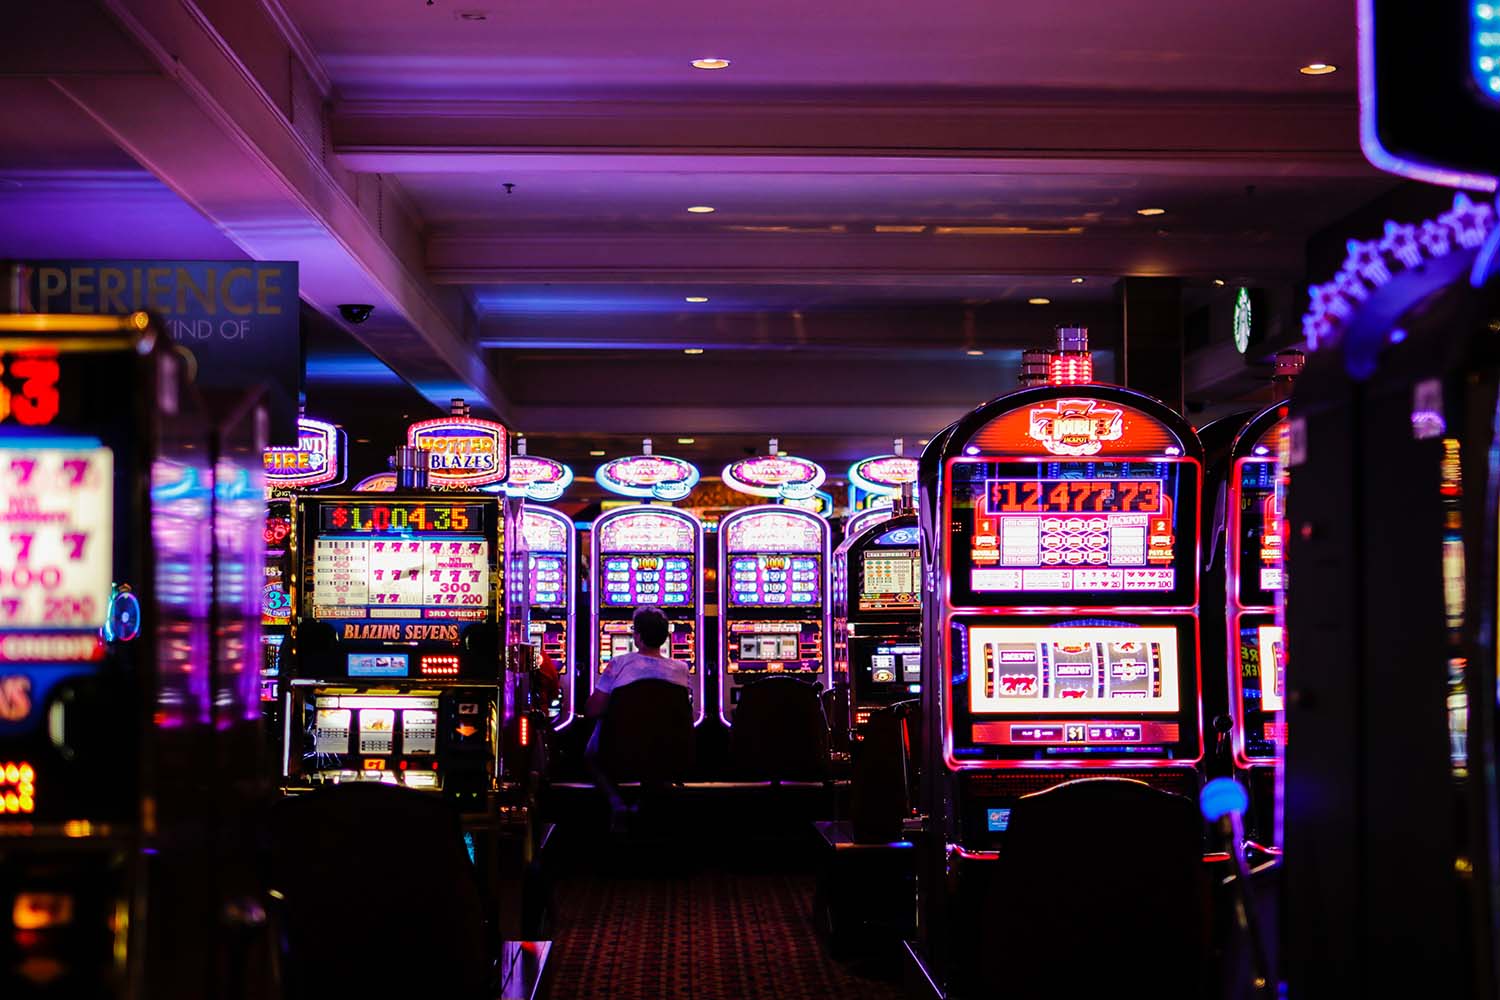 Social media's use of slot machine pyschology and what's next for big tech